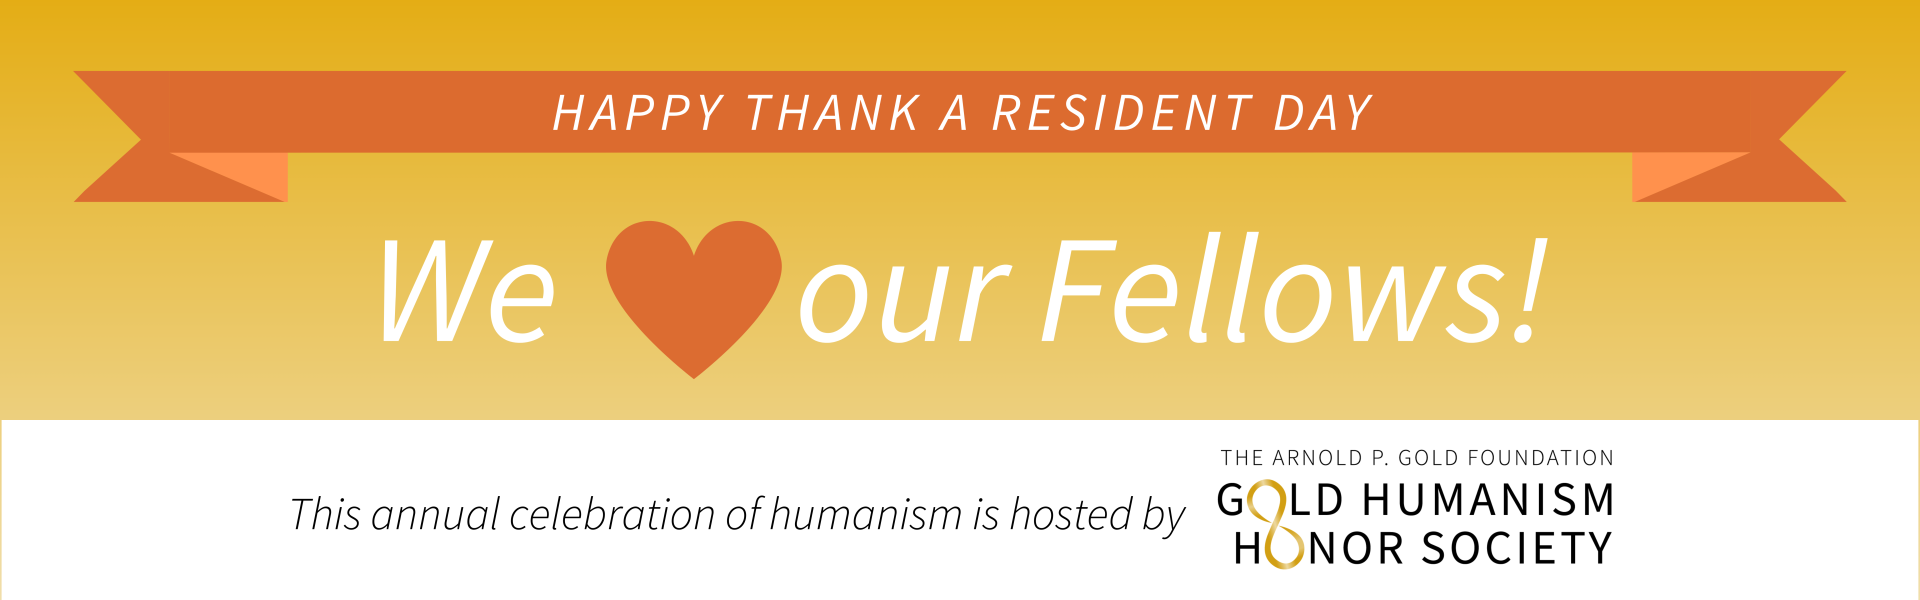 HAPPY THANK A RESIDENT DAY / WE (heart shape) our Fellows. This annual celebration of humanism is hosted by The Arnold P Gold Humanism Honor Society